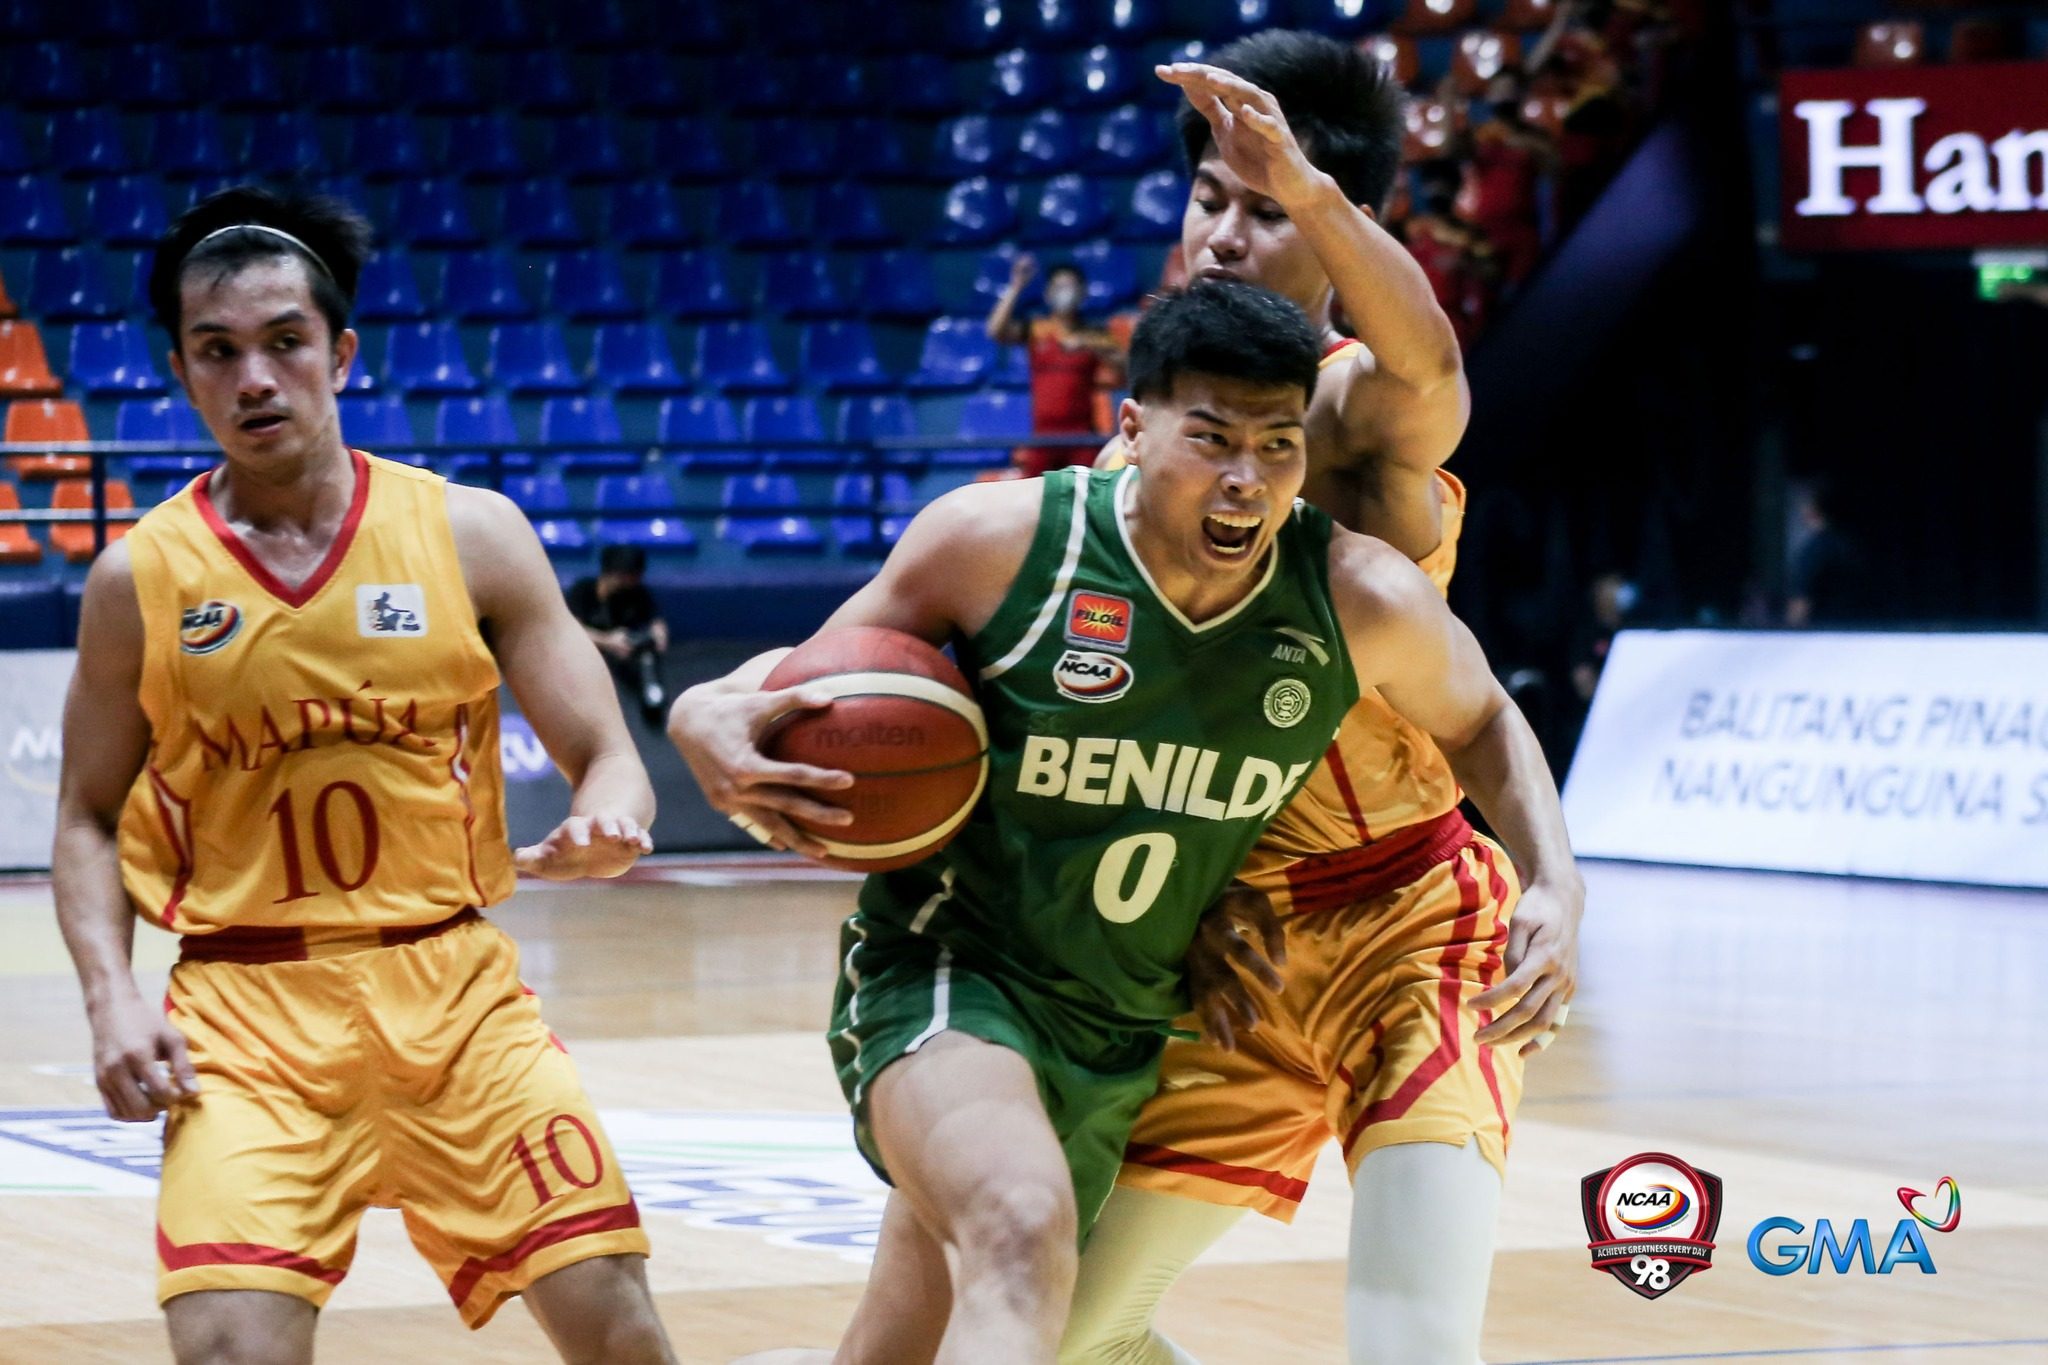 Will Gozum wins 3rd Player of the Week as CSB breaks 20-year playoff drought